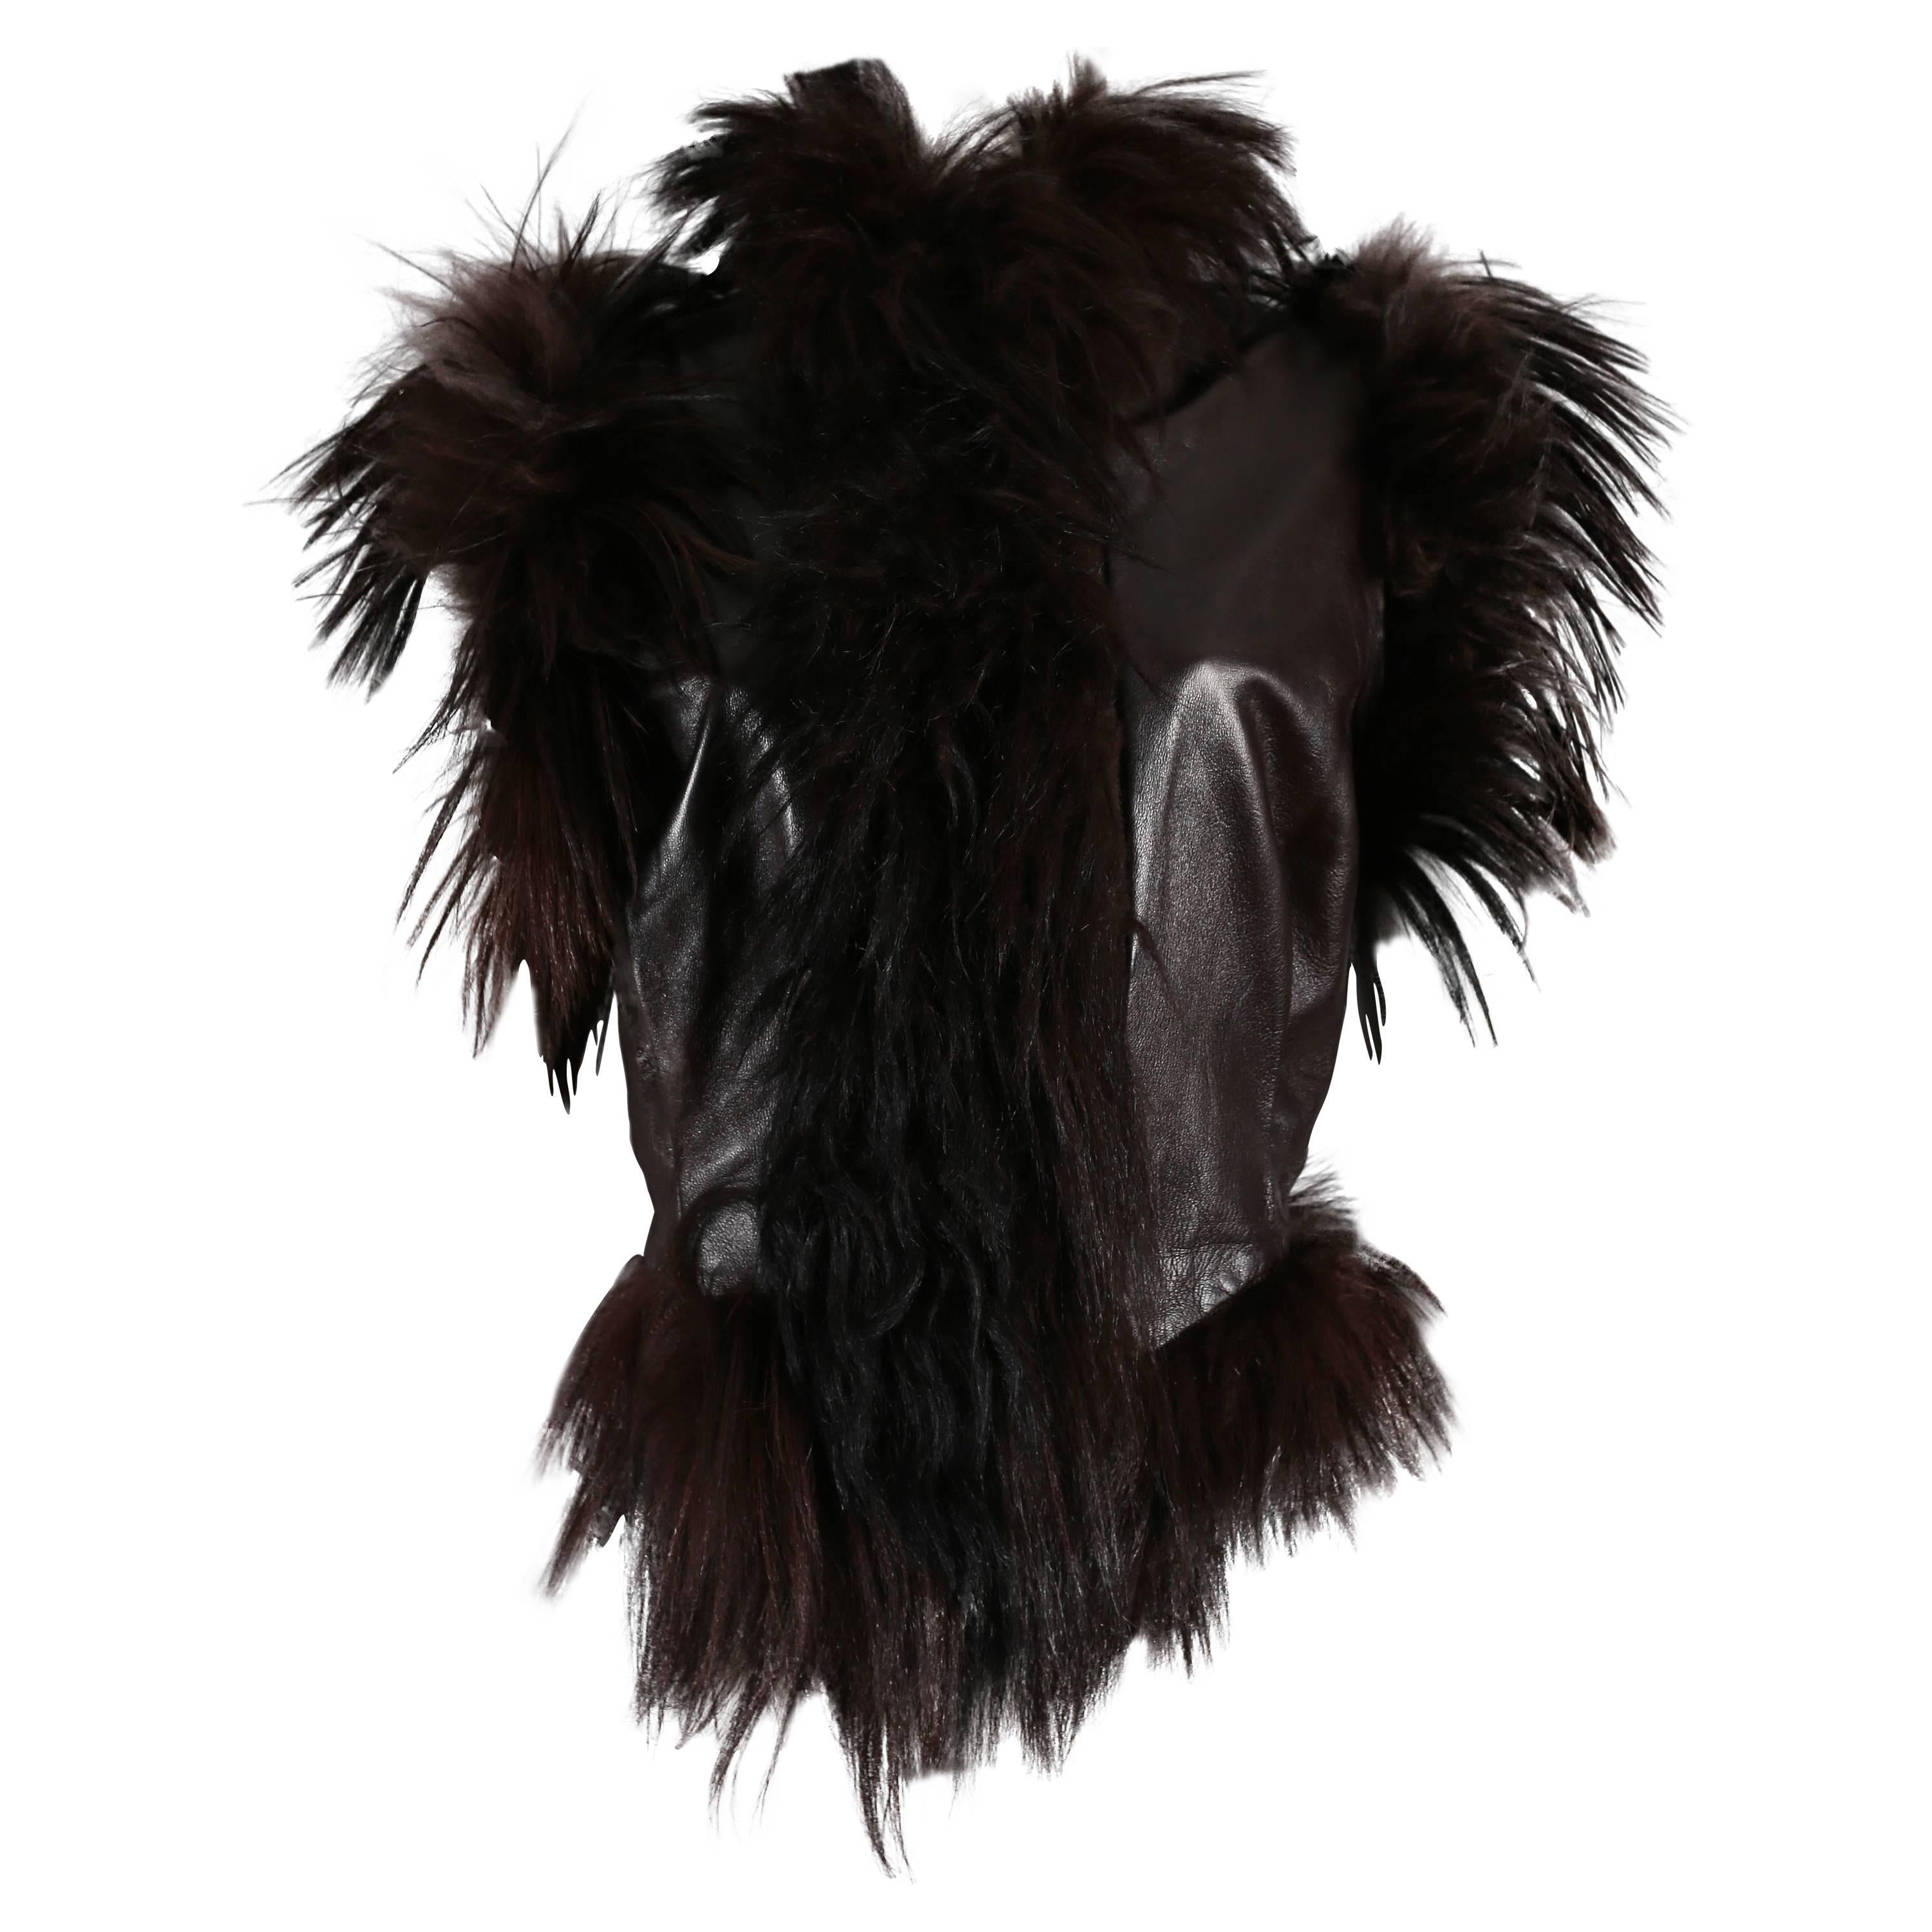 Alexander McQueen goat hair and leather gillet jacket, circa 2000 For Sale